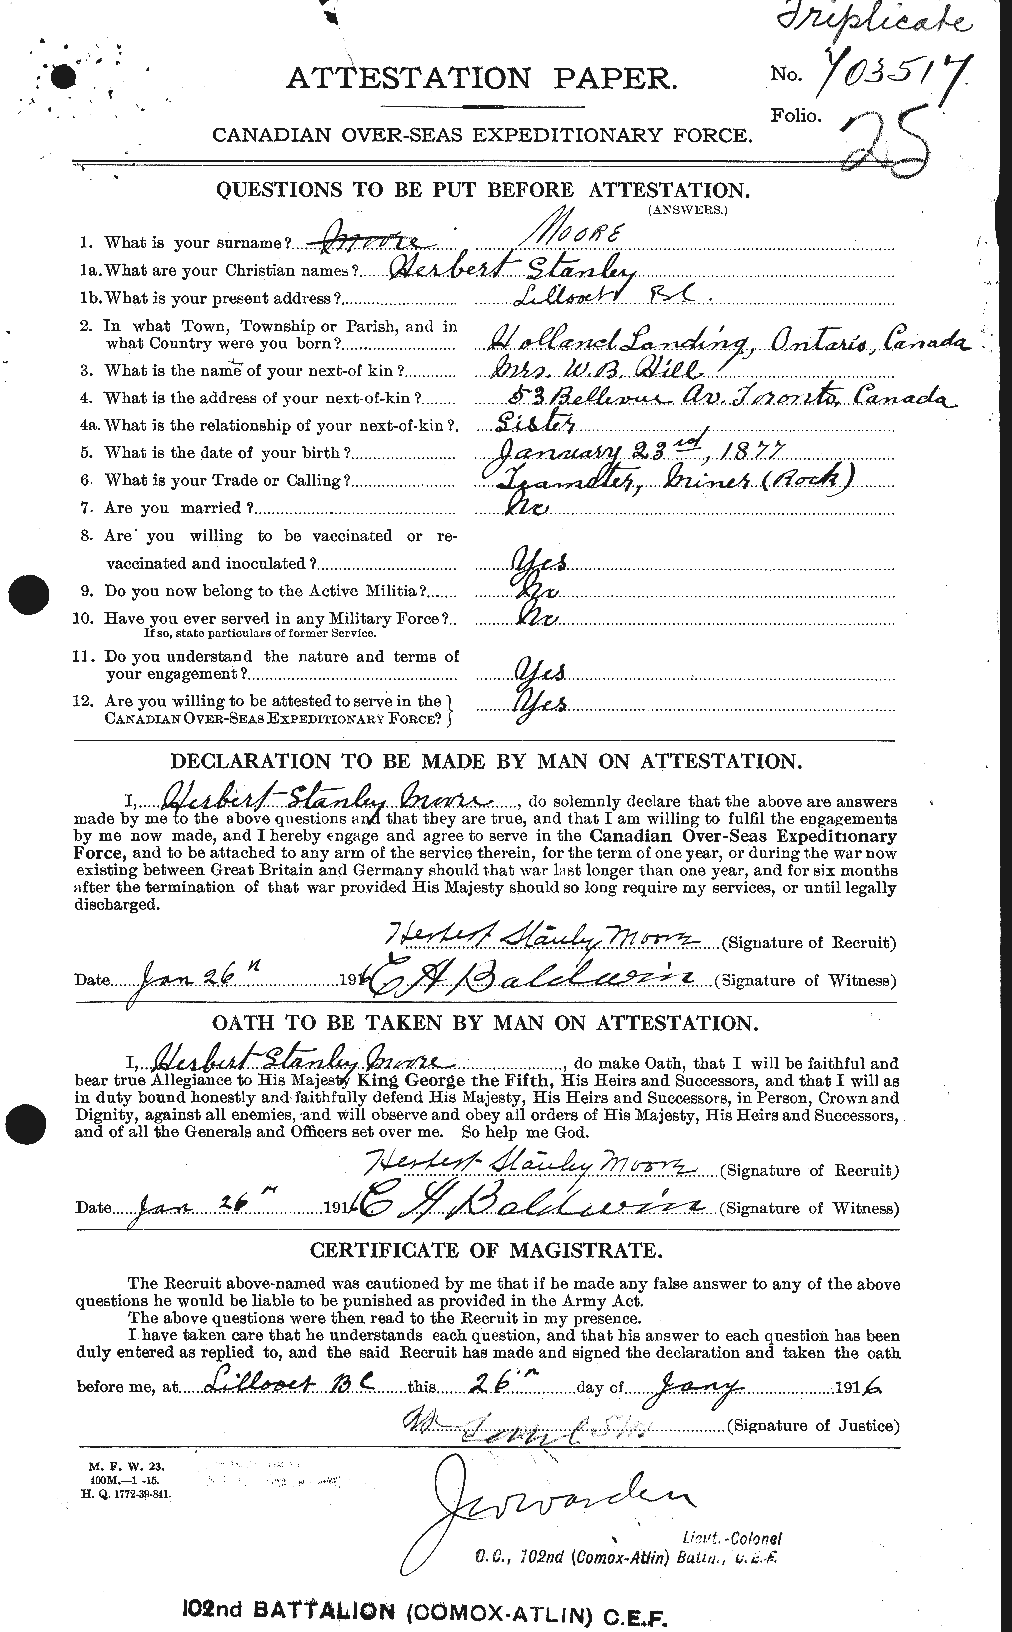 Personnel Records of the First World War - CEF 502126a